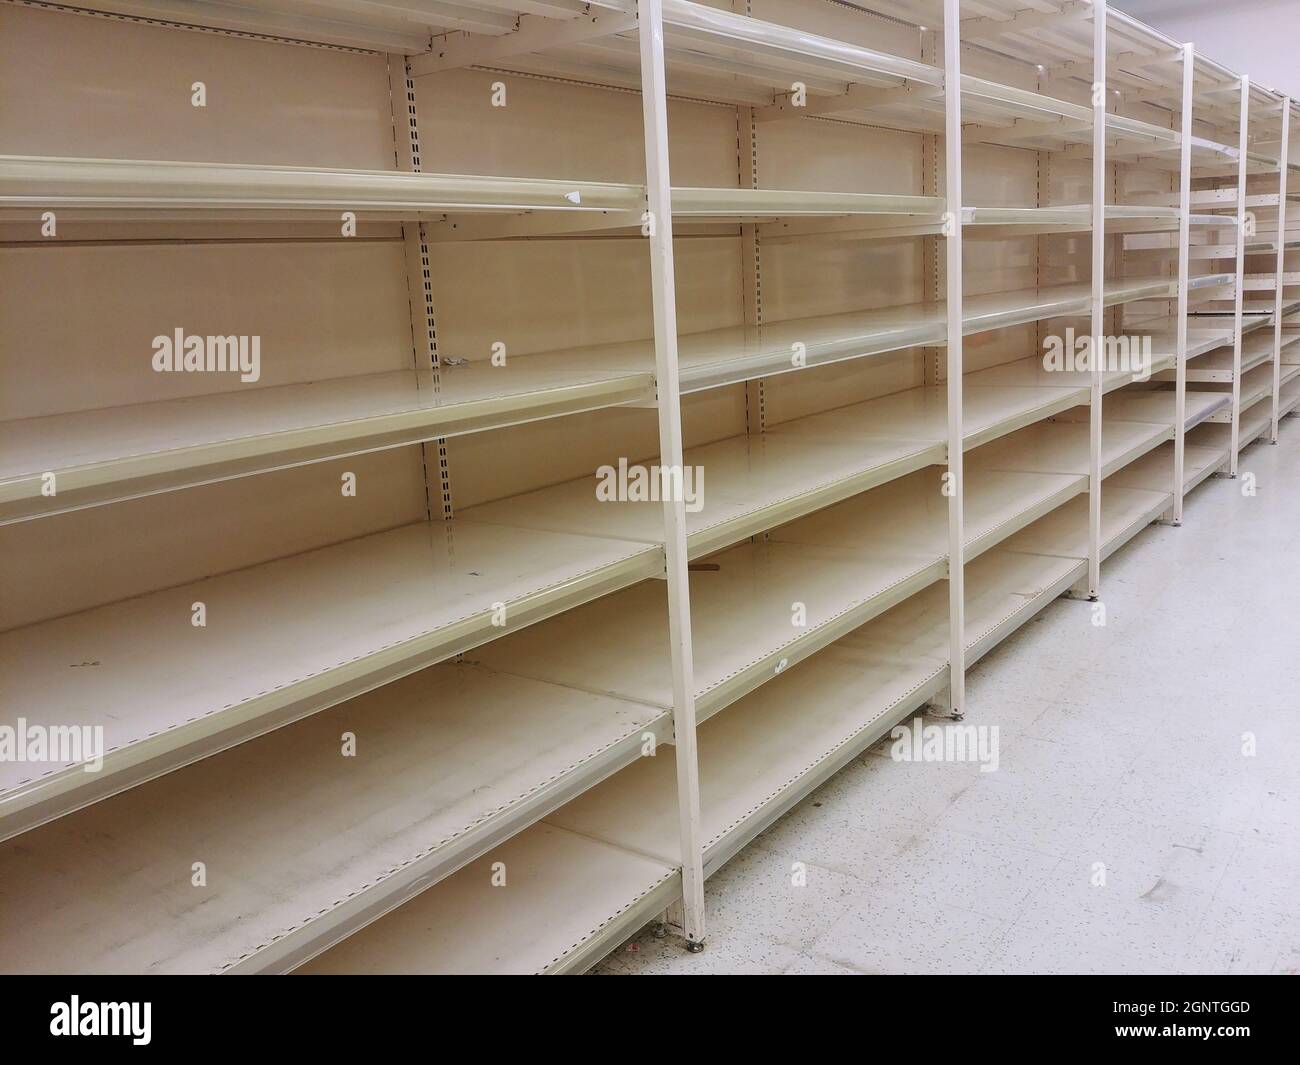 Food shortage, empty supermarket shelves, stalls without items, economic crisis, out of stock. Stock Photo